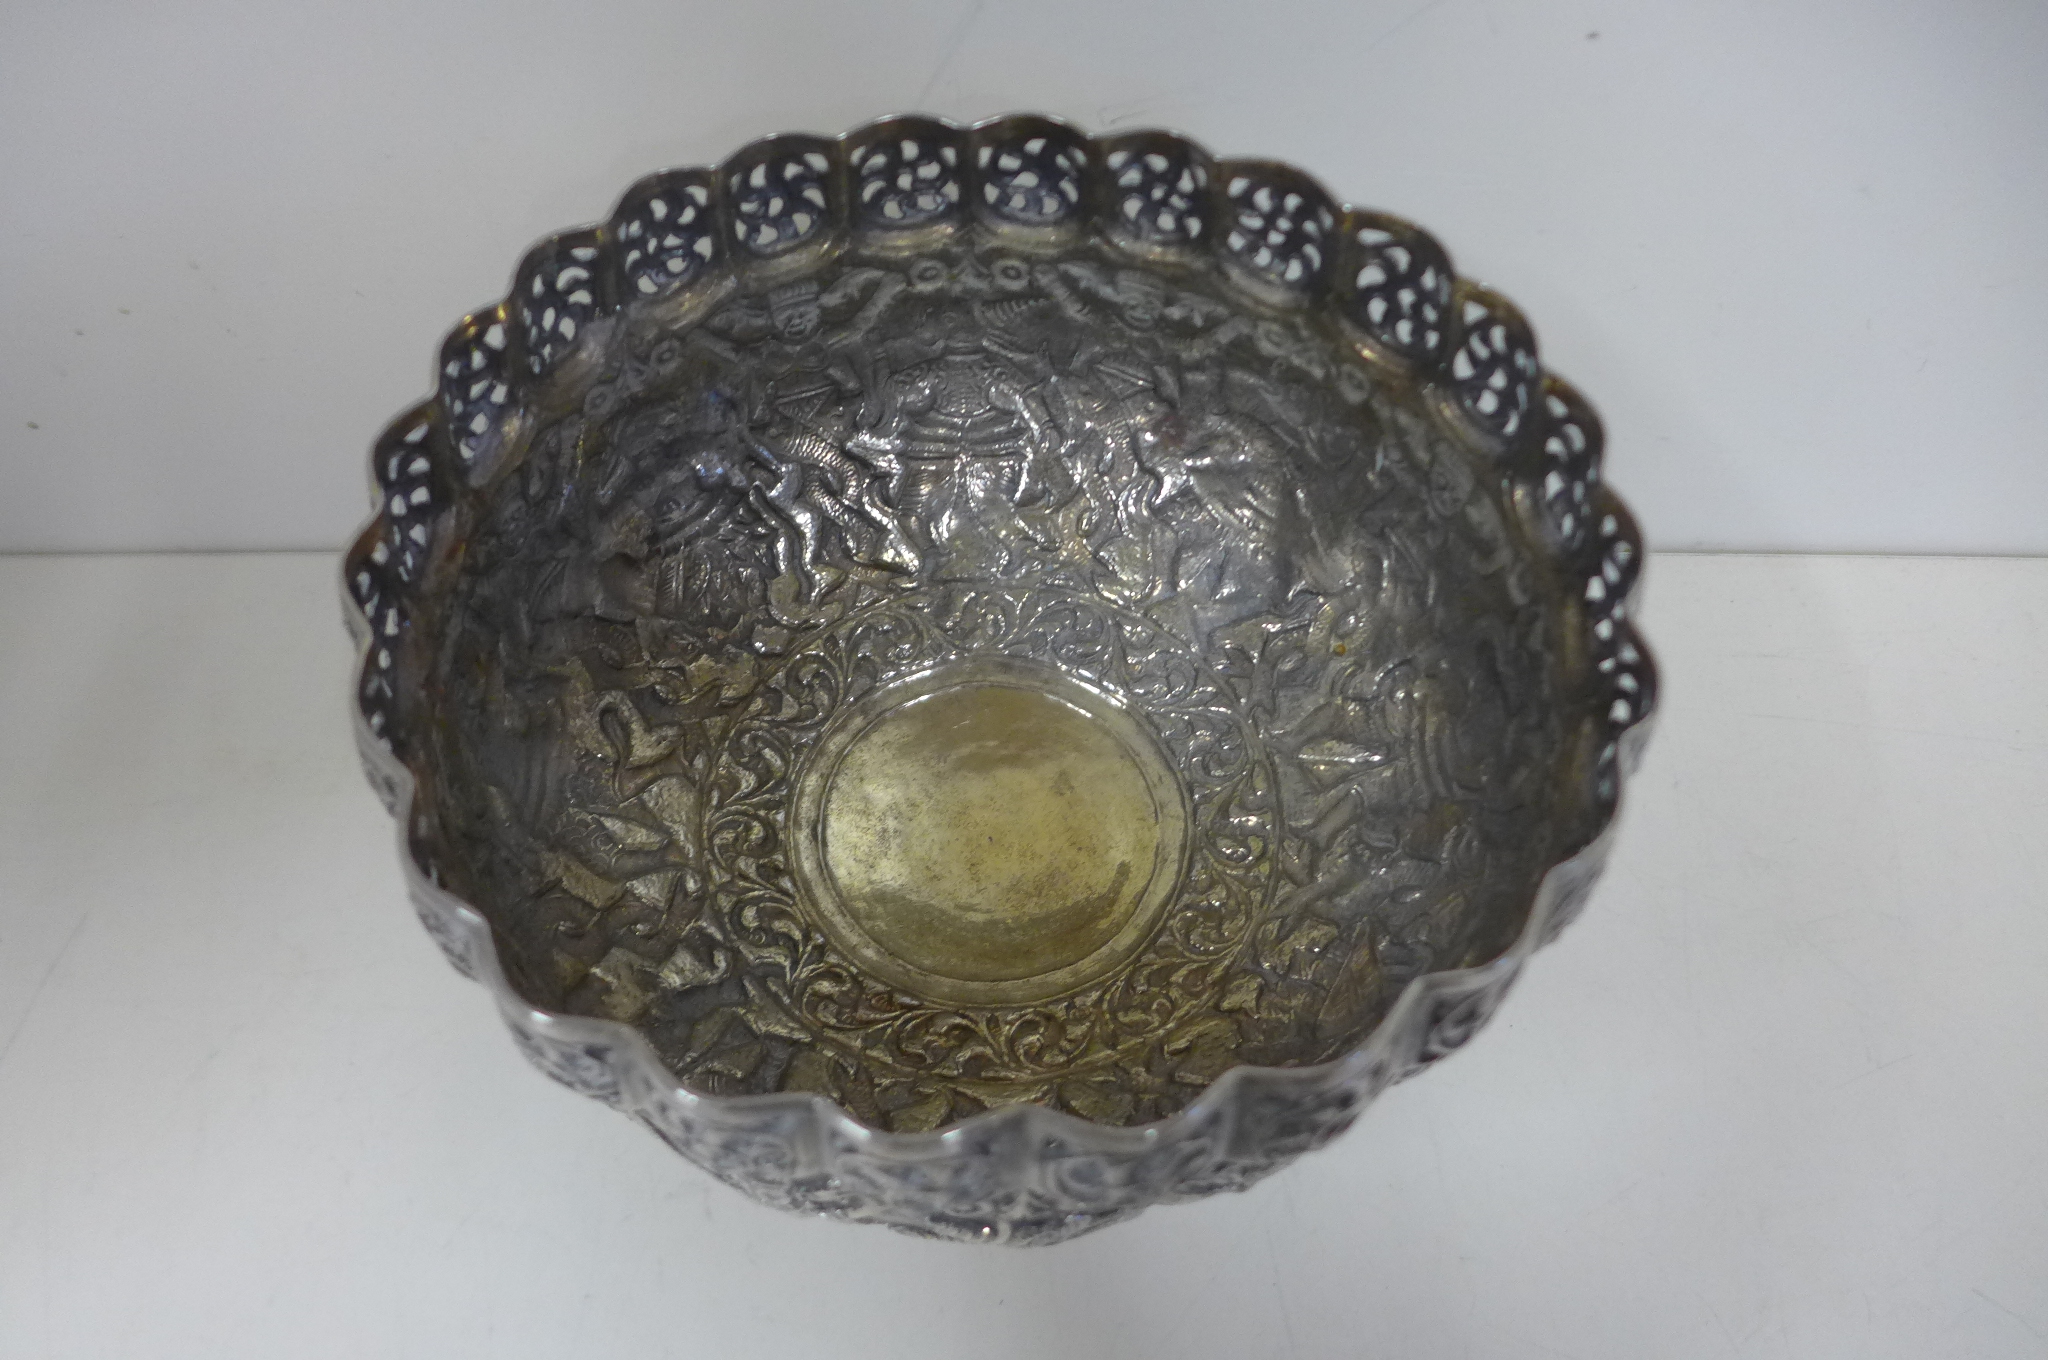 A 19th century Thai silver stem bowl decorated with mythical animals and beings, height 13.5cm, - Image 3 of 4